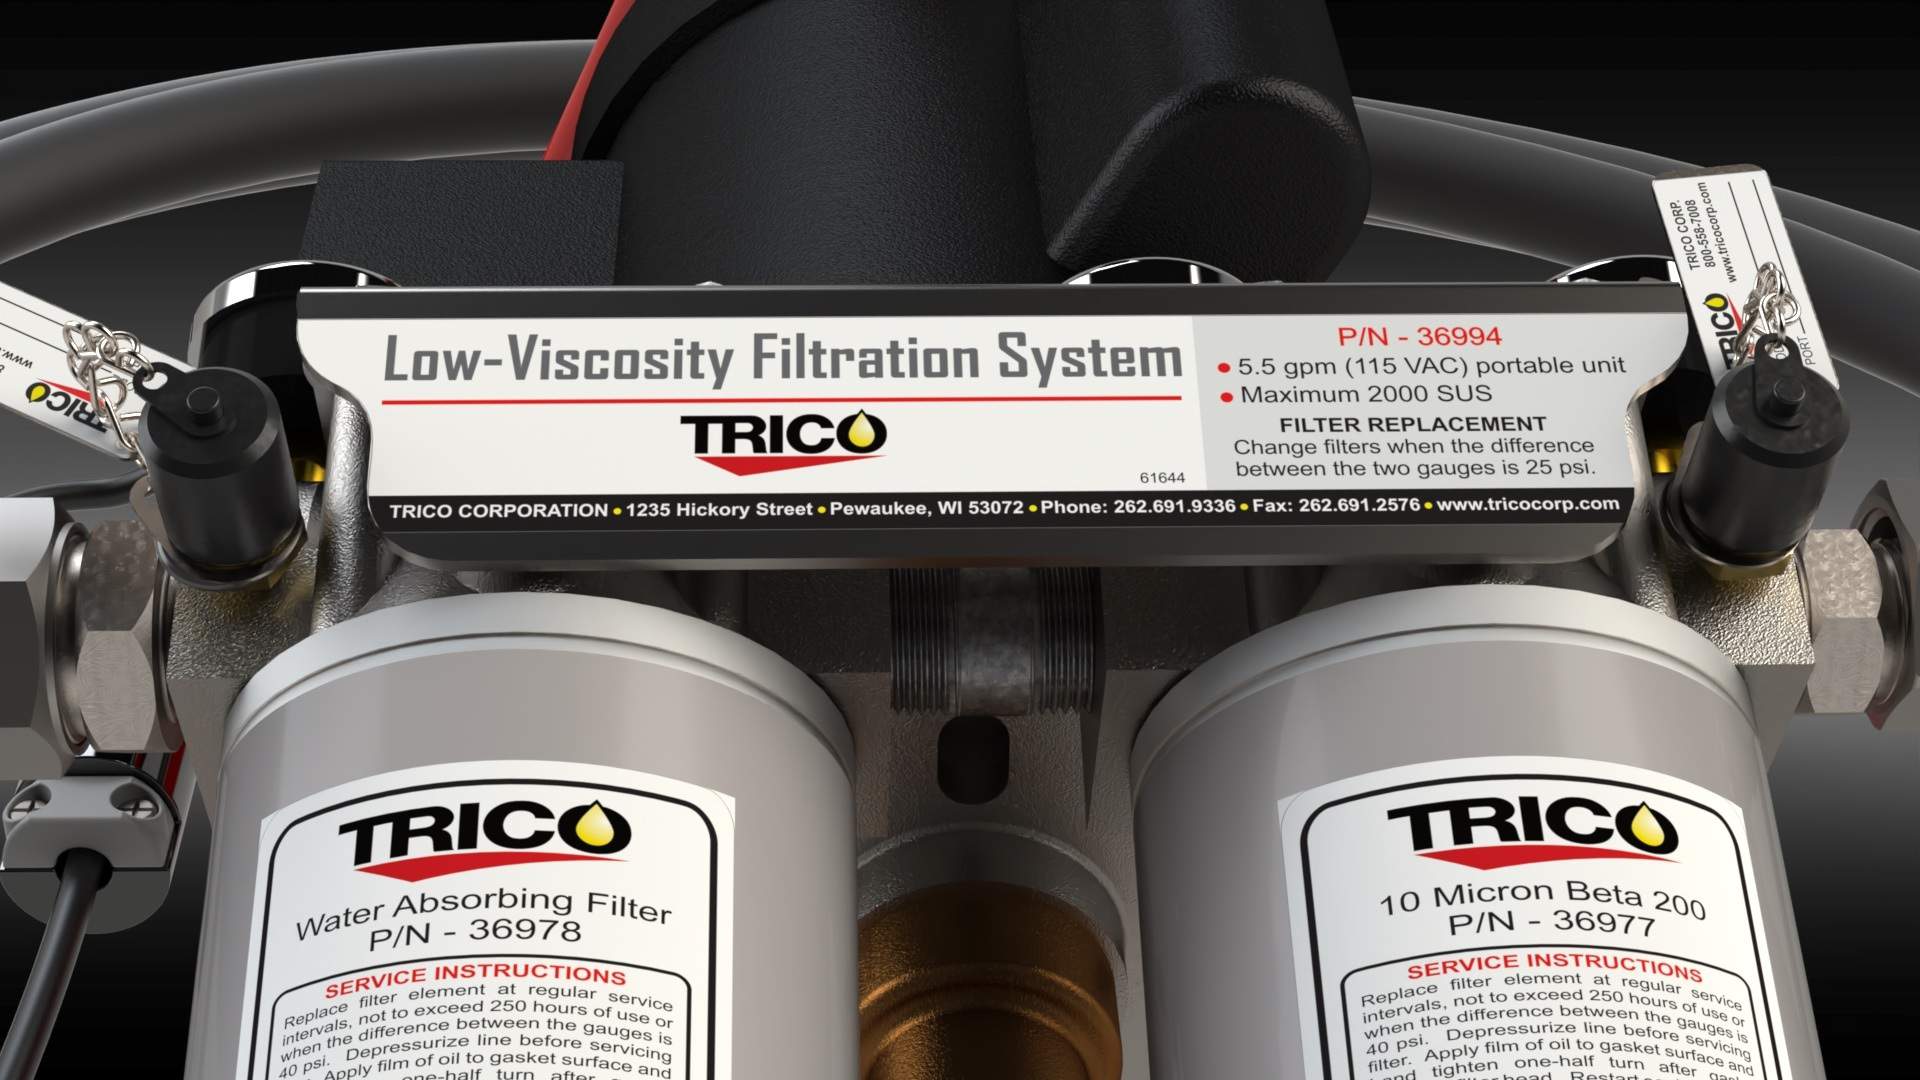 Low-Viscosity Hand-Held Filtration System | Trico Corporation